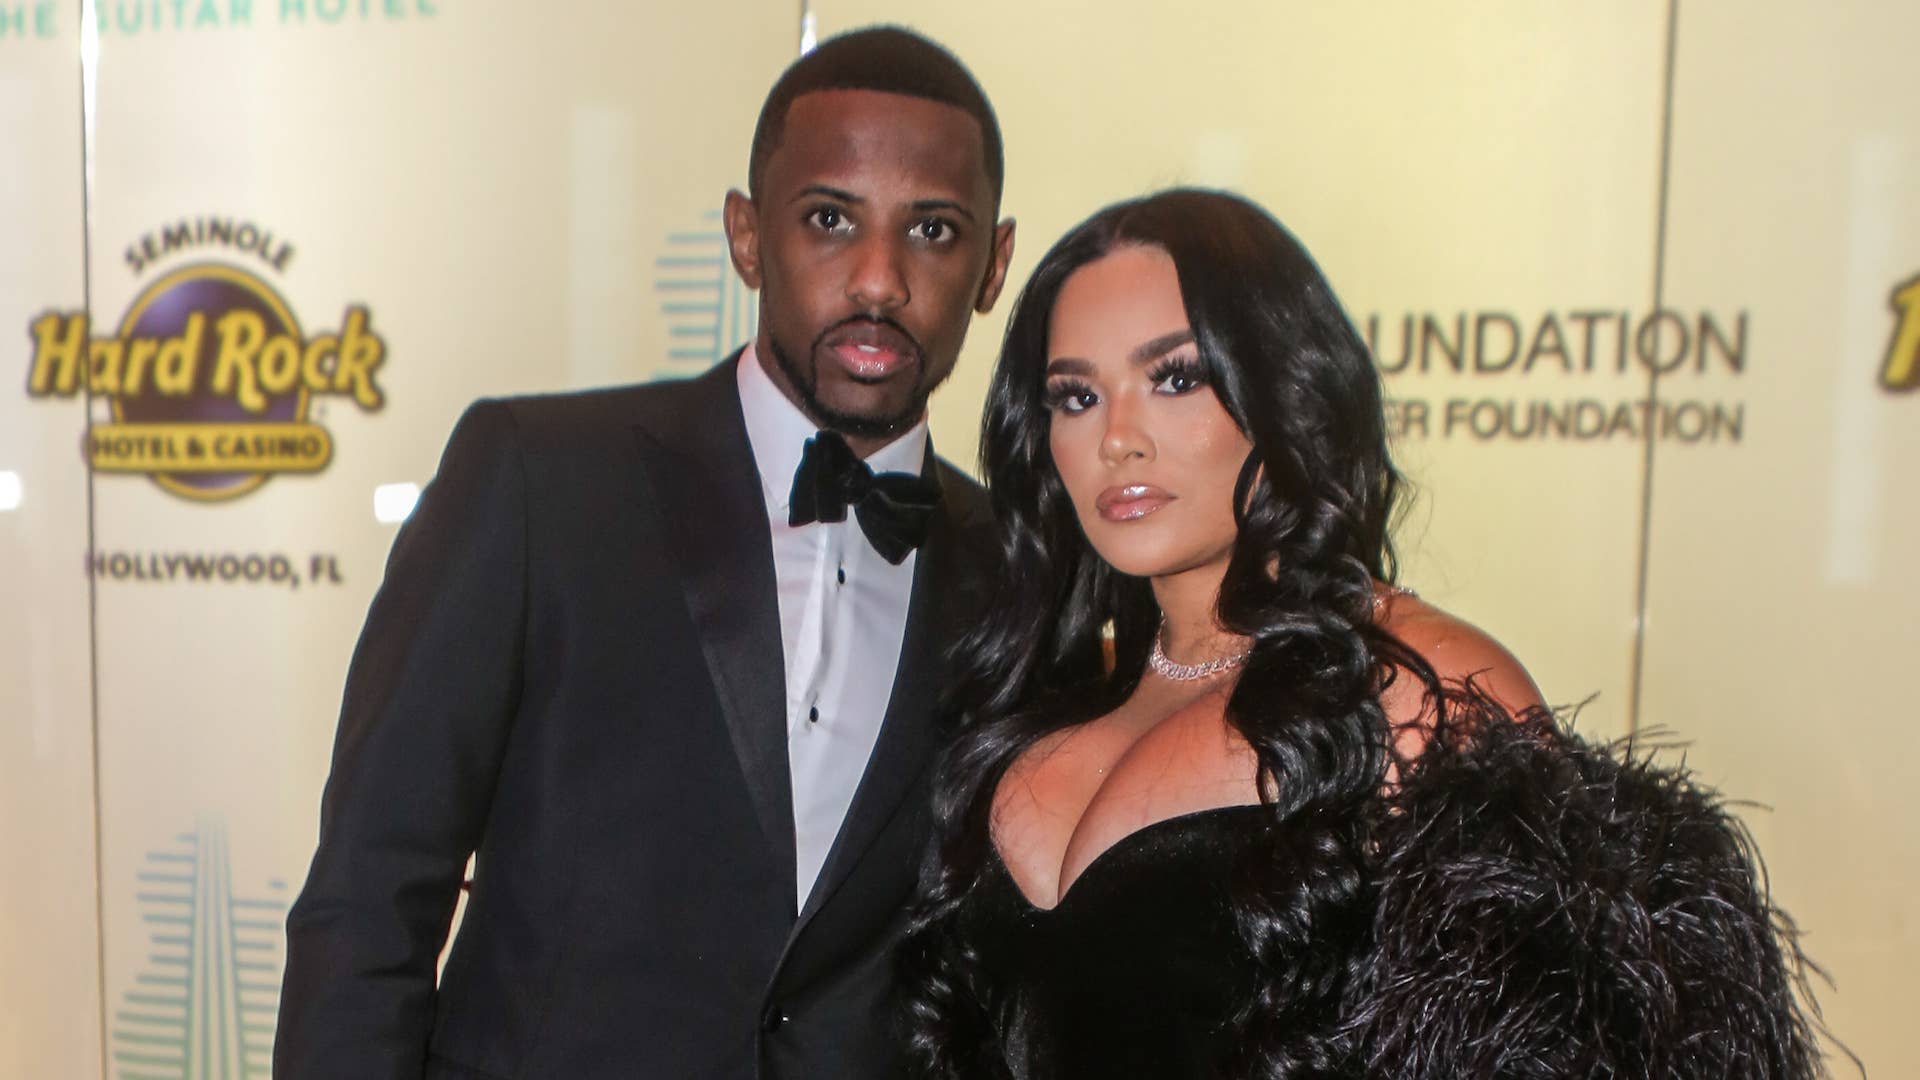 Fabolous and Emily B arrive at the Shawn Carter Foundation Gala.